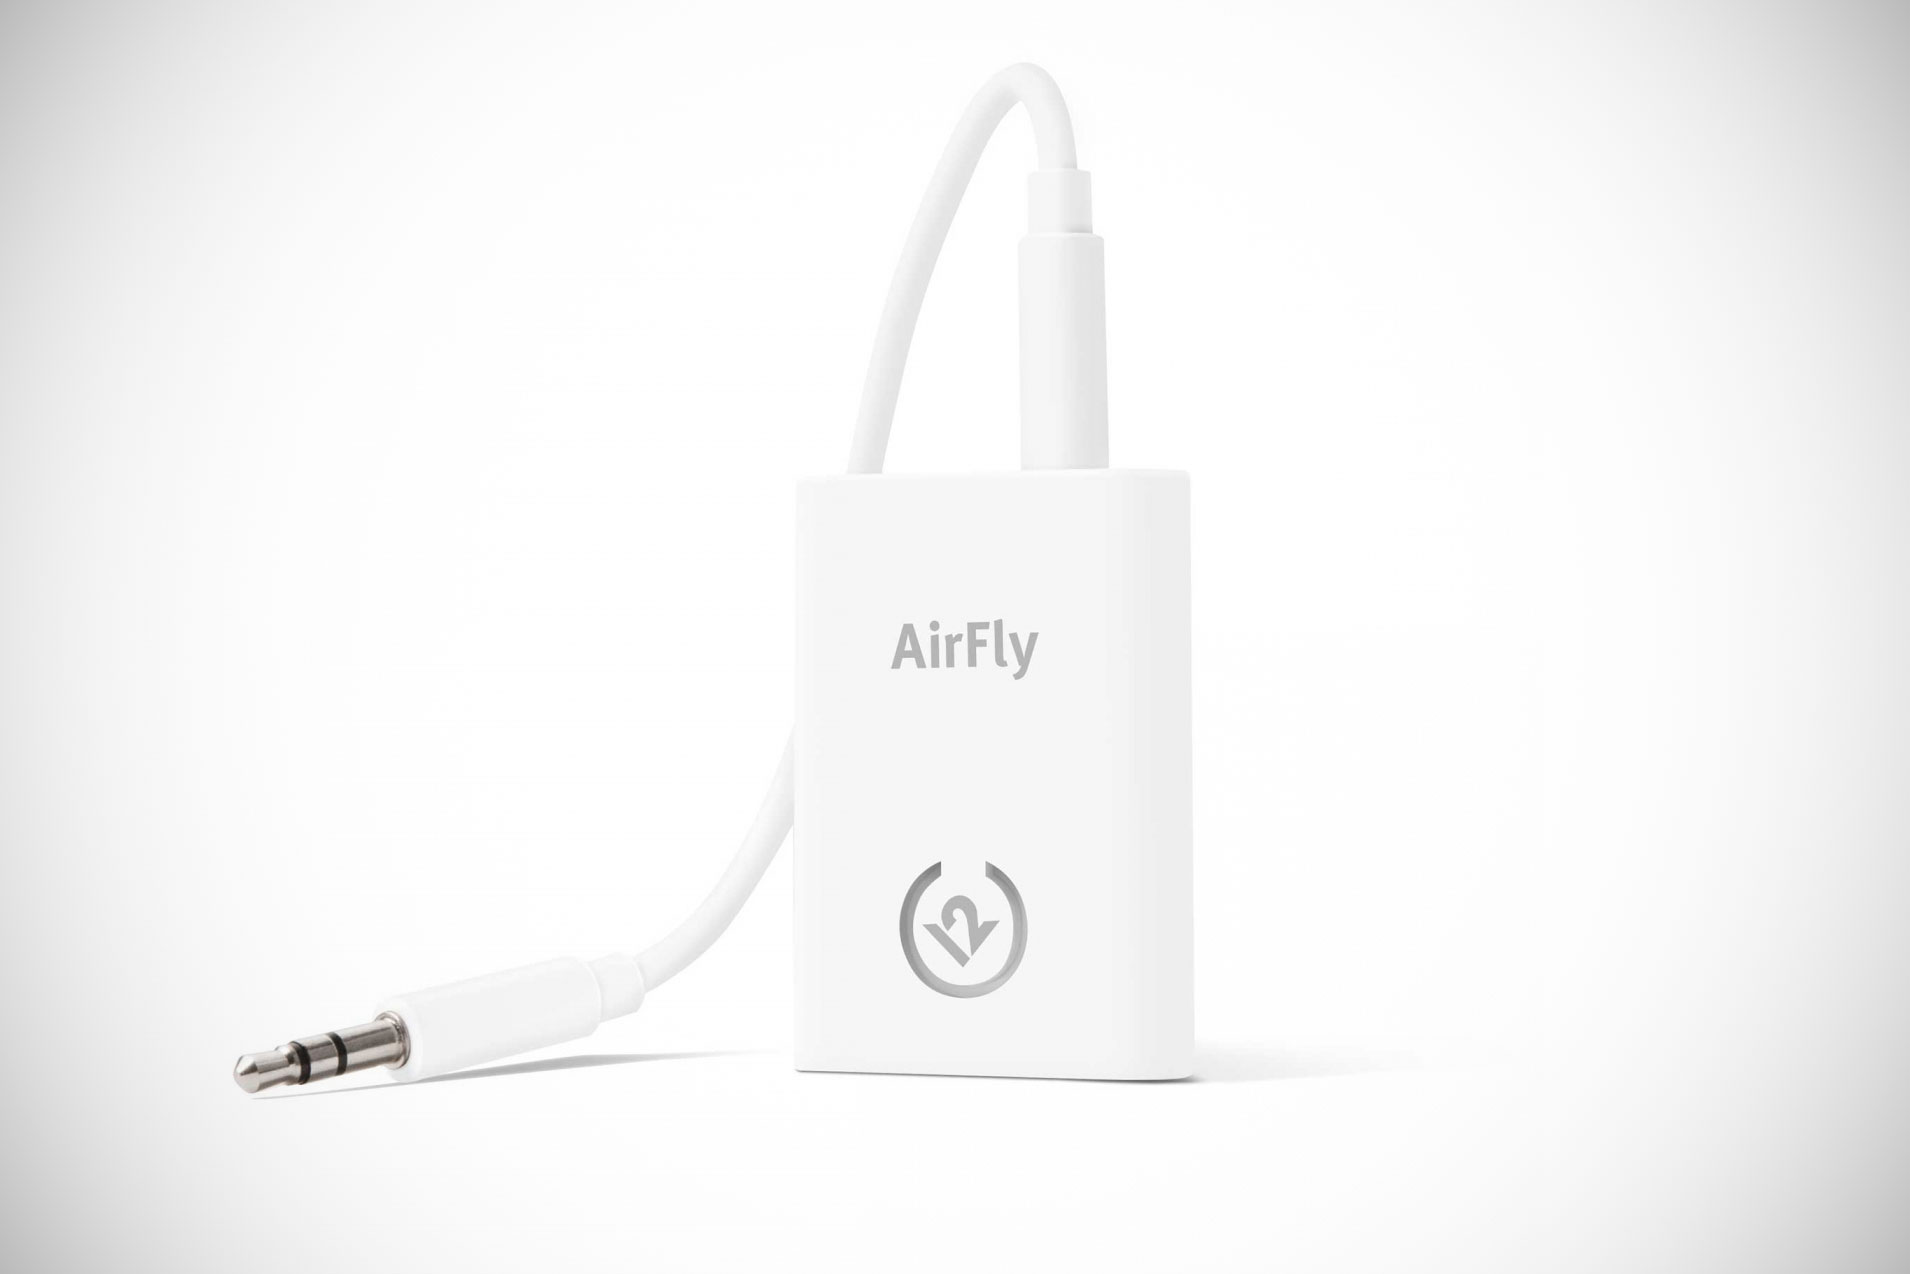 https://www.digitaltrends.com/wp-content/uploads/2018/05/airfly.jpg?fit=1910%2C1274&p=1